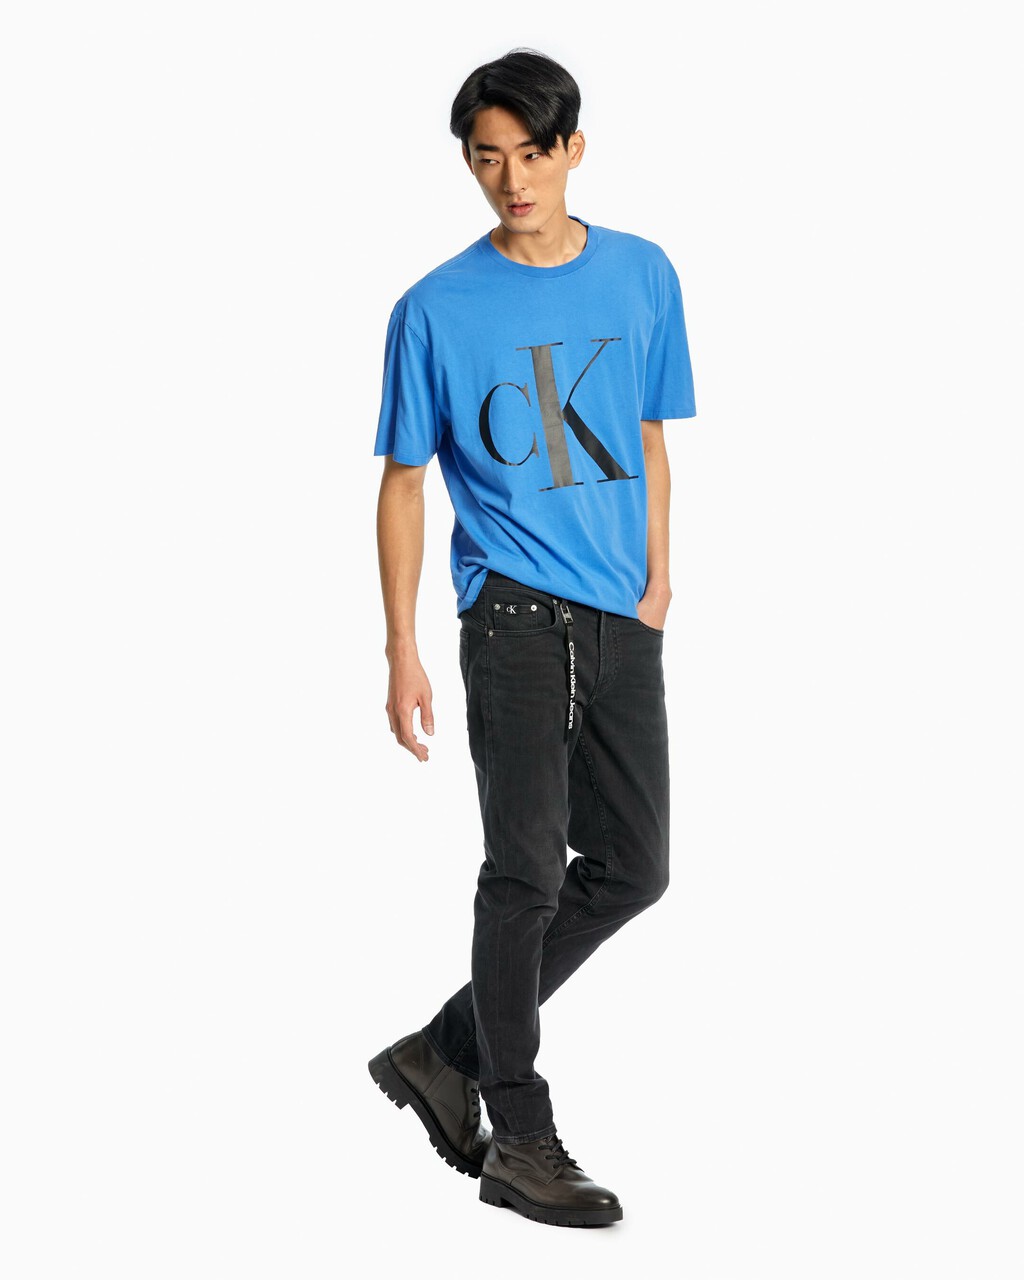 MONOGRAM RELAXED FIT TEE, PALACE BLUE-400, hi-res